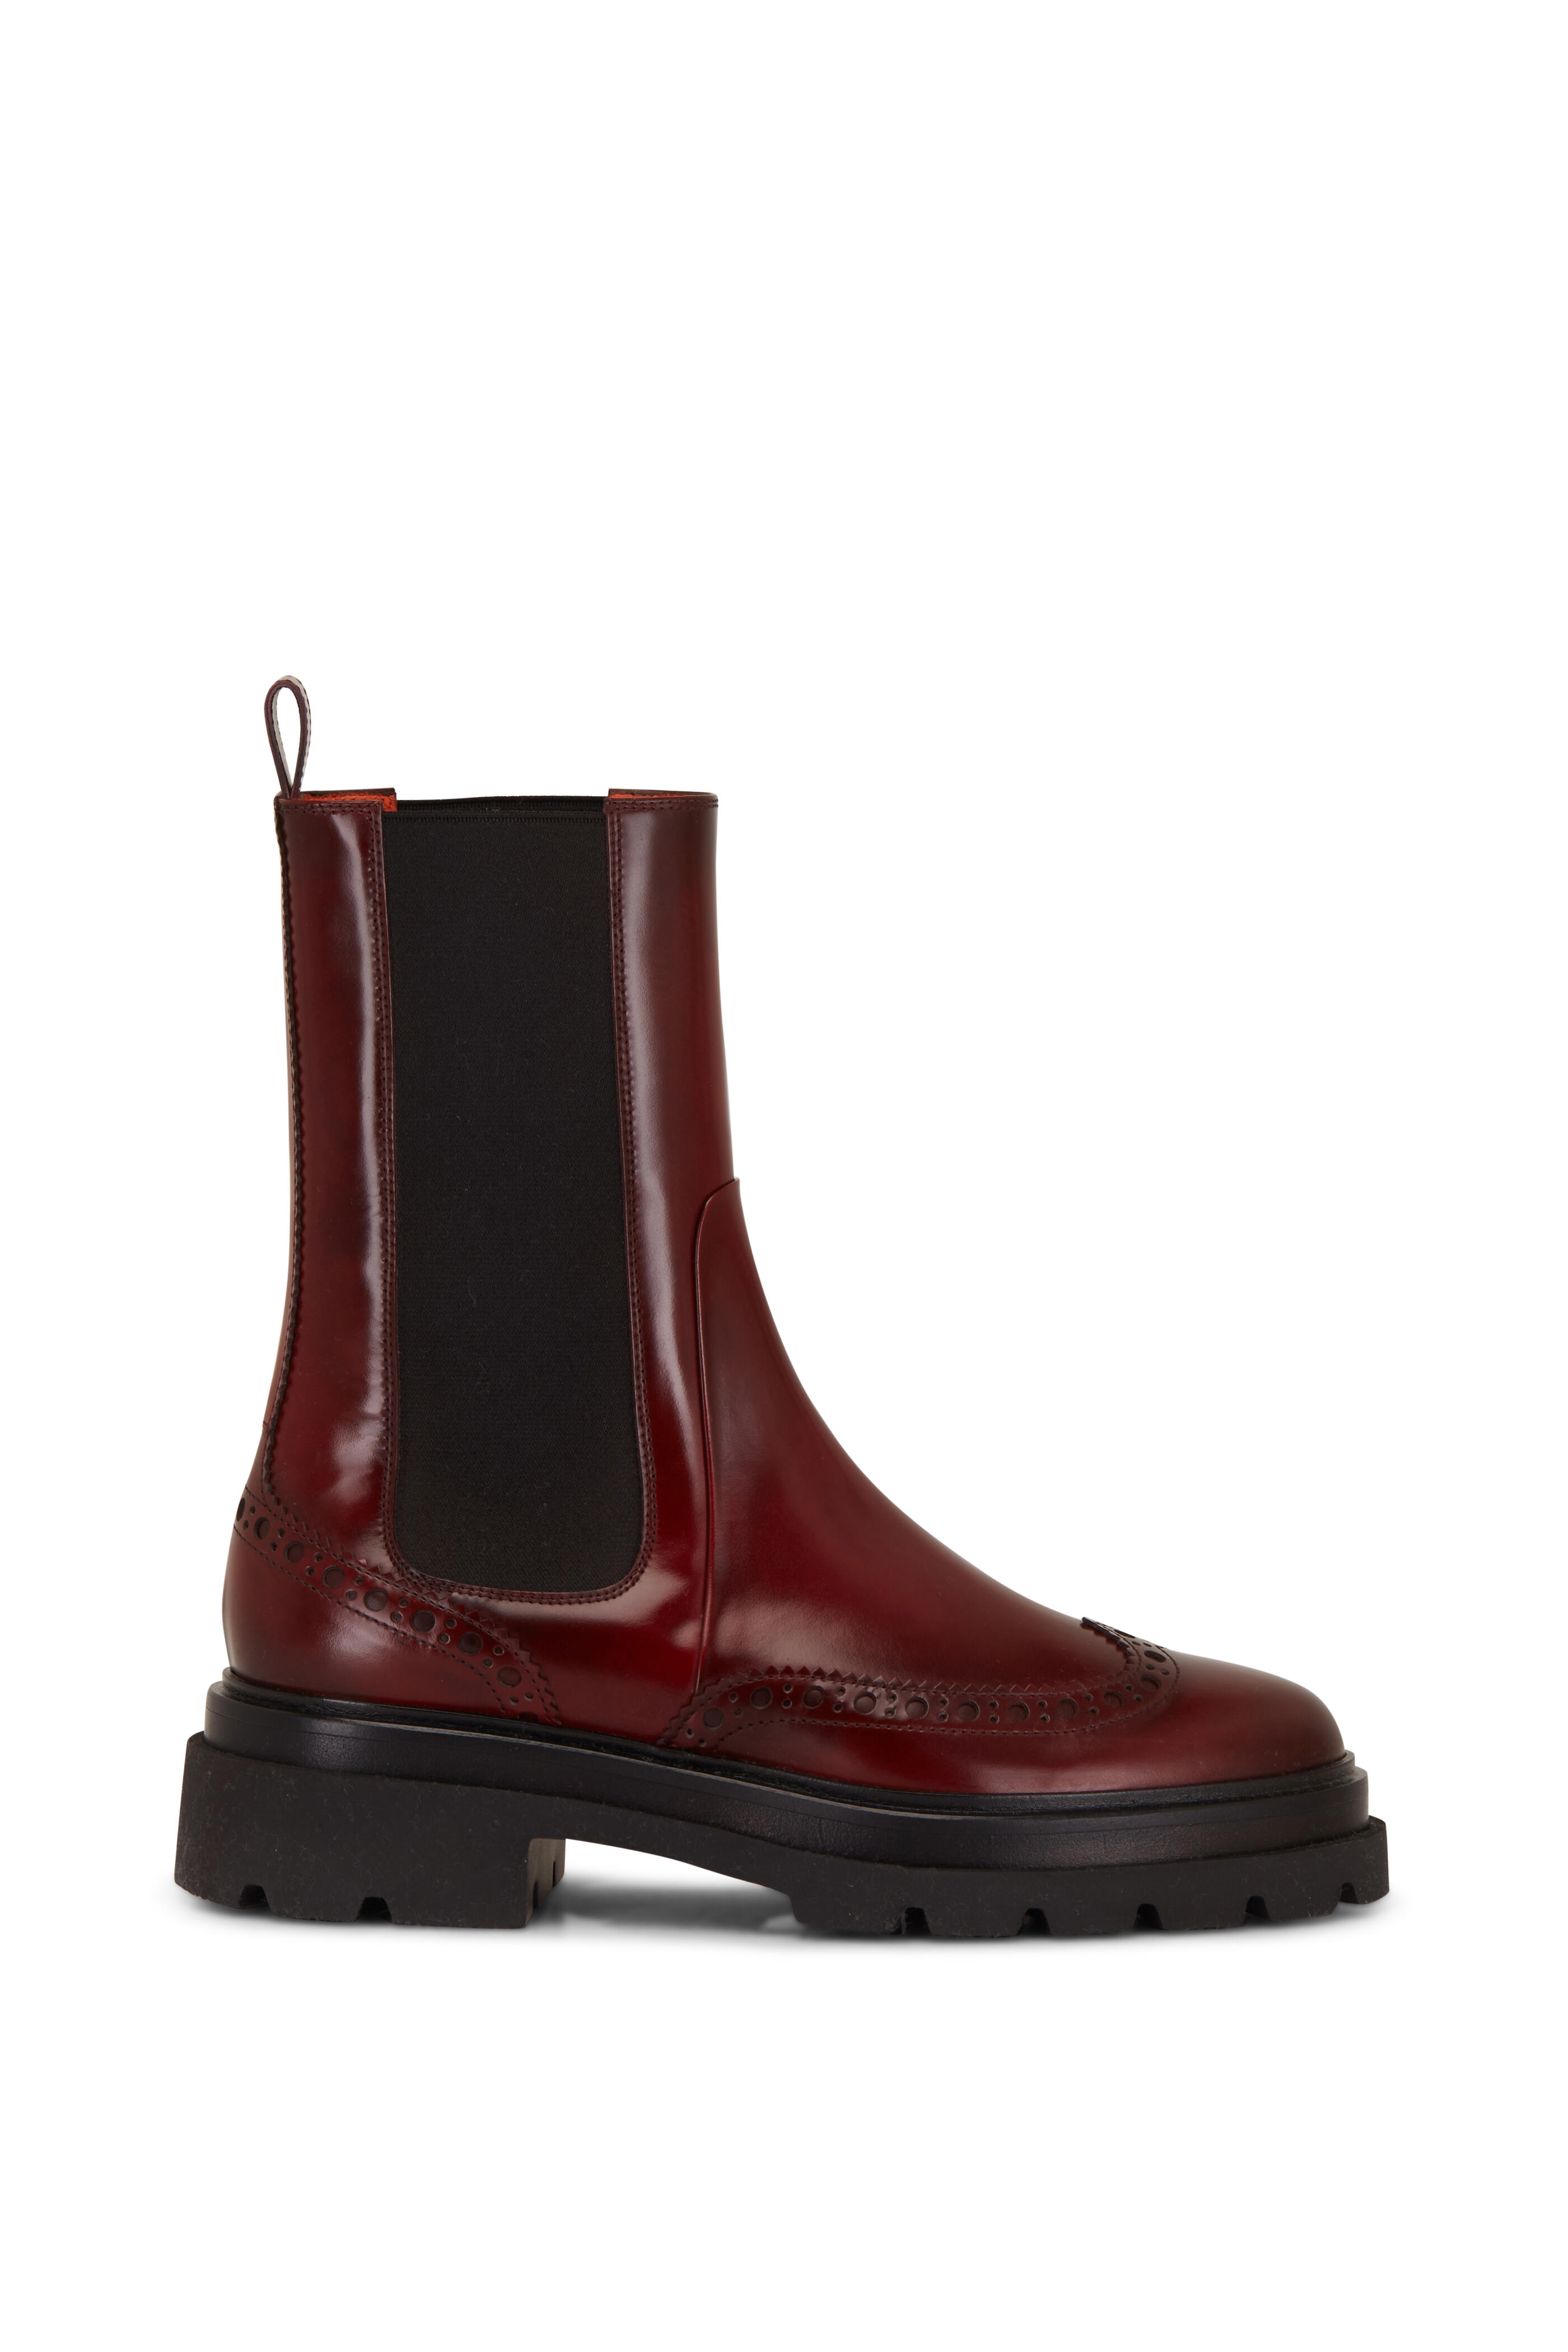 Santoni - Floes Red Leather Wingtip Boot | Mitchell Stores